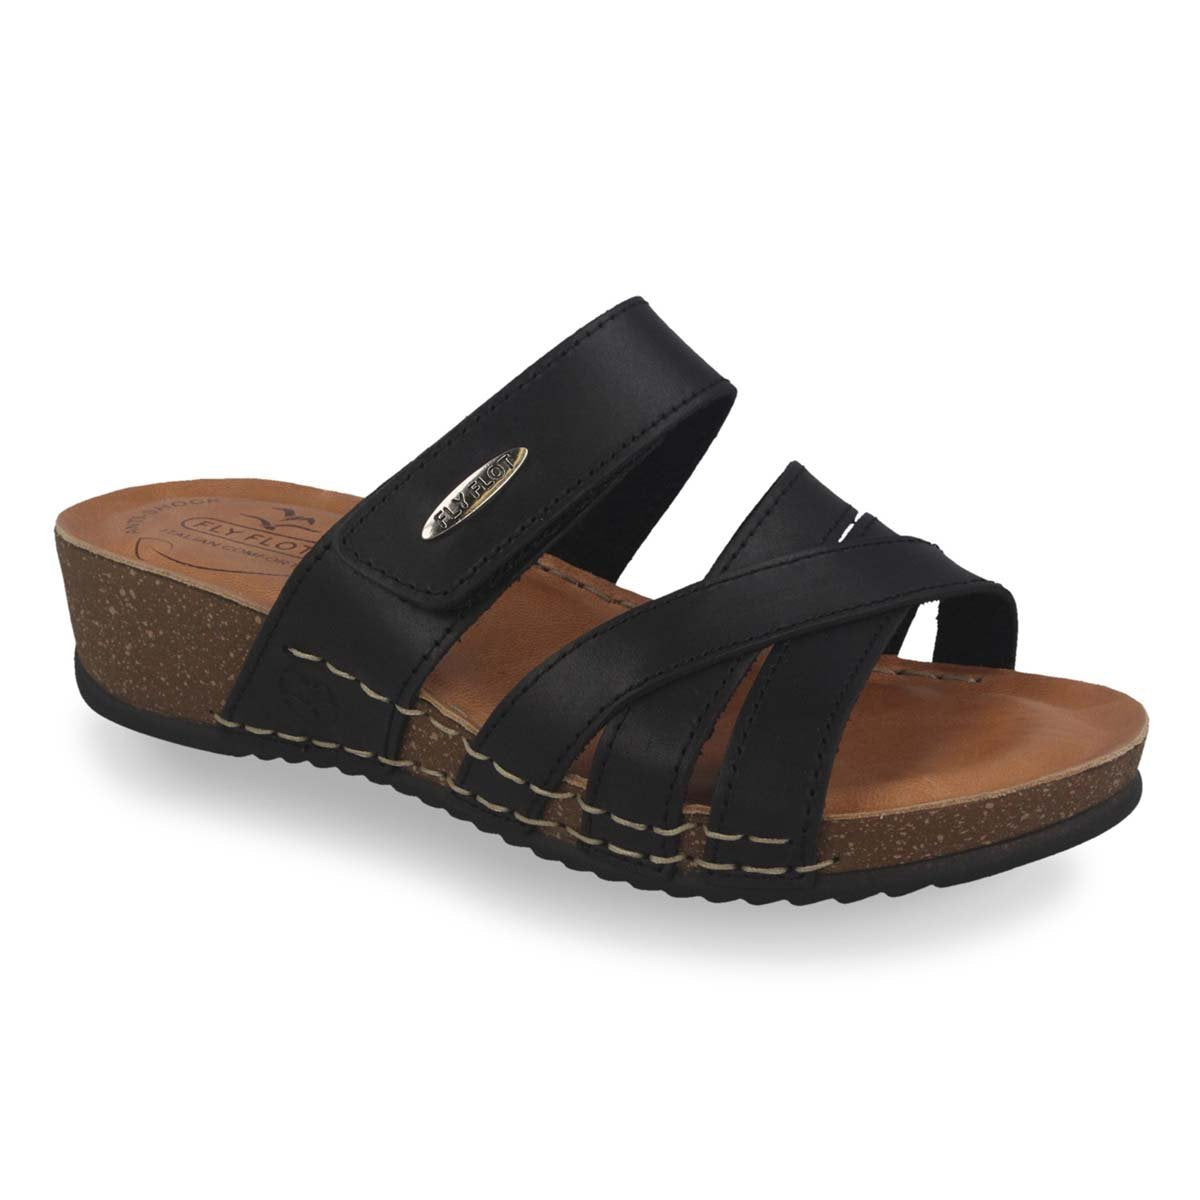 See the Velcro Strappy Slide Women Sandals With  Anti-Shock Cushioned Leather Insole in the colour BLACK, available in various sizes